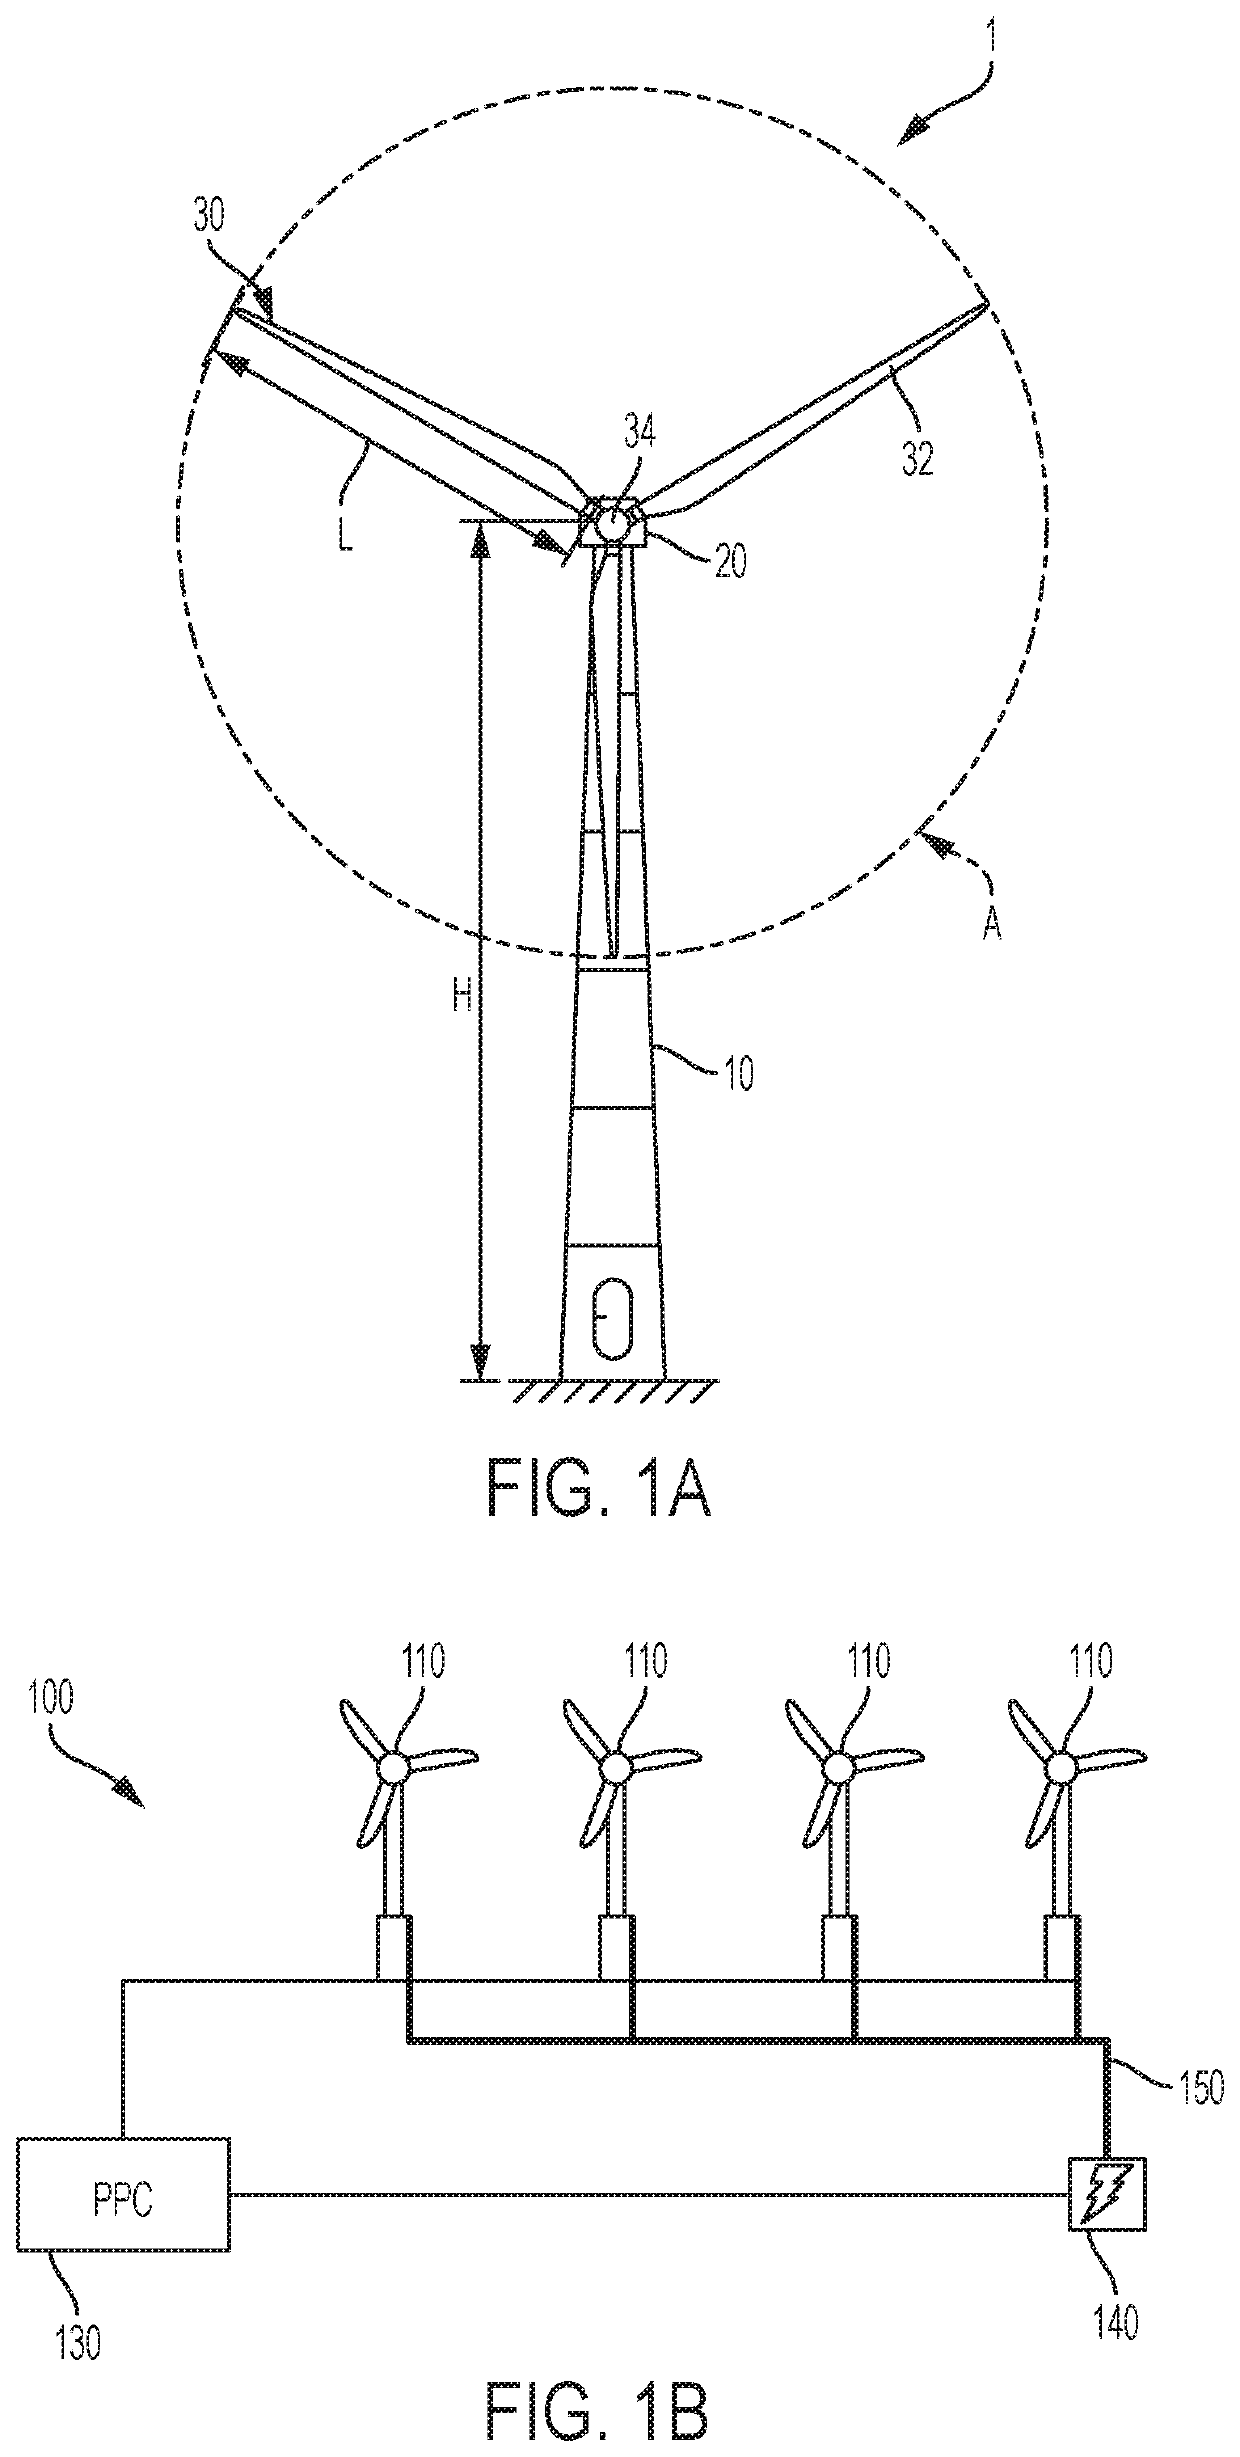 Control method and system for protection of wind turbines